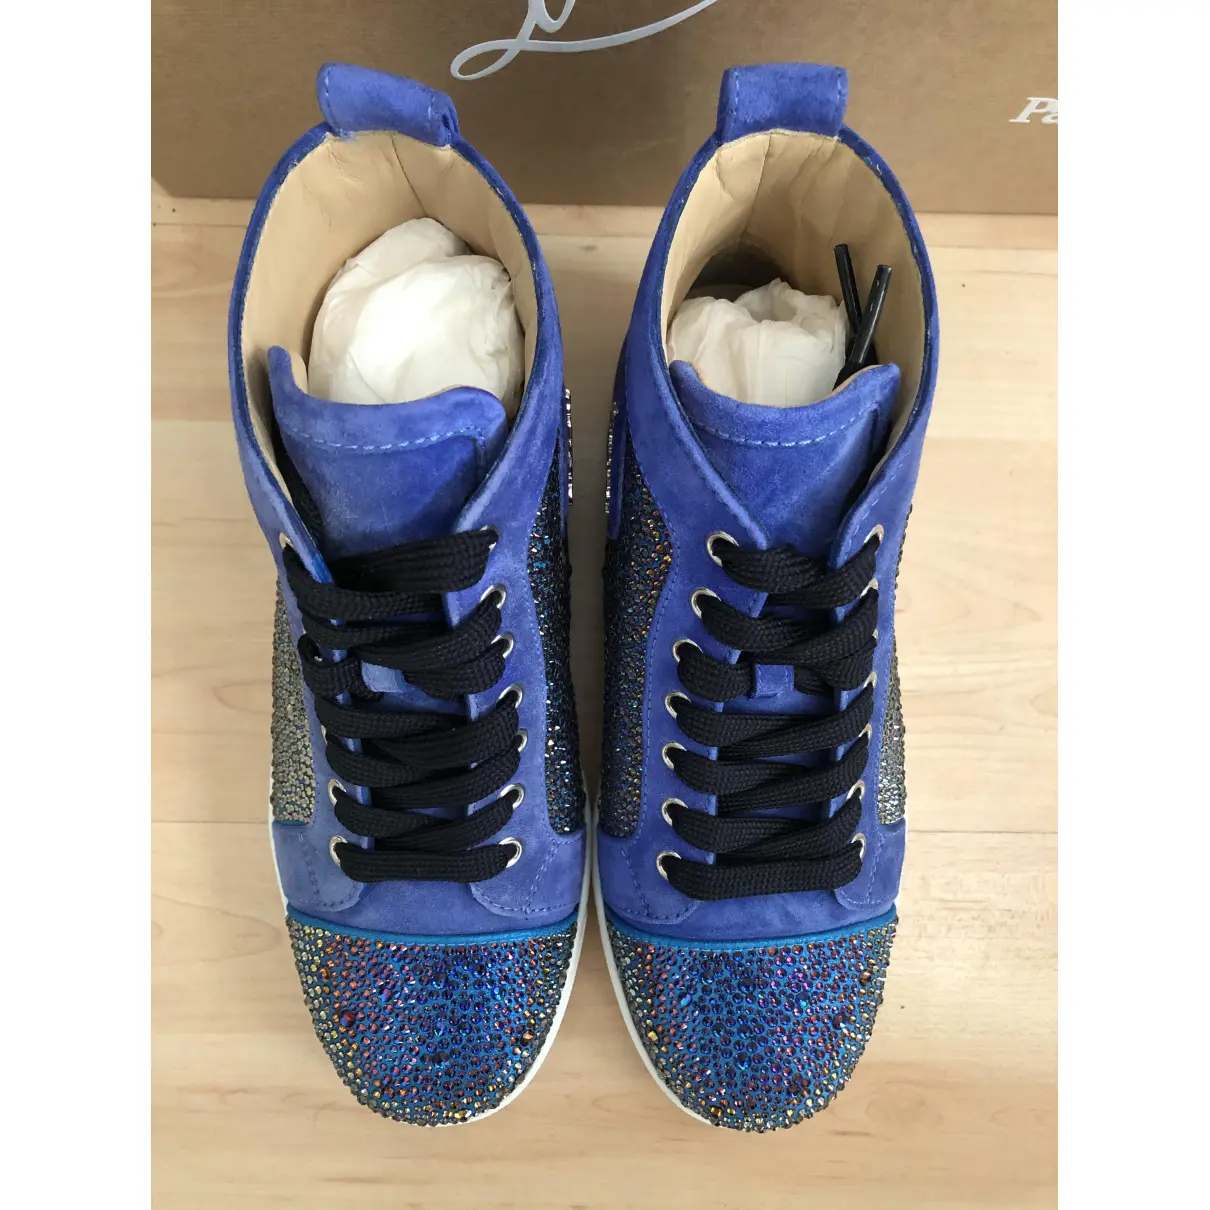 Buy Christian Louboutin Louis trainers online